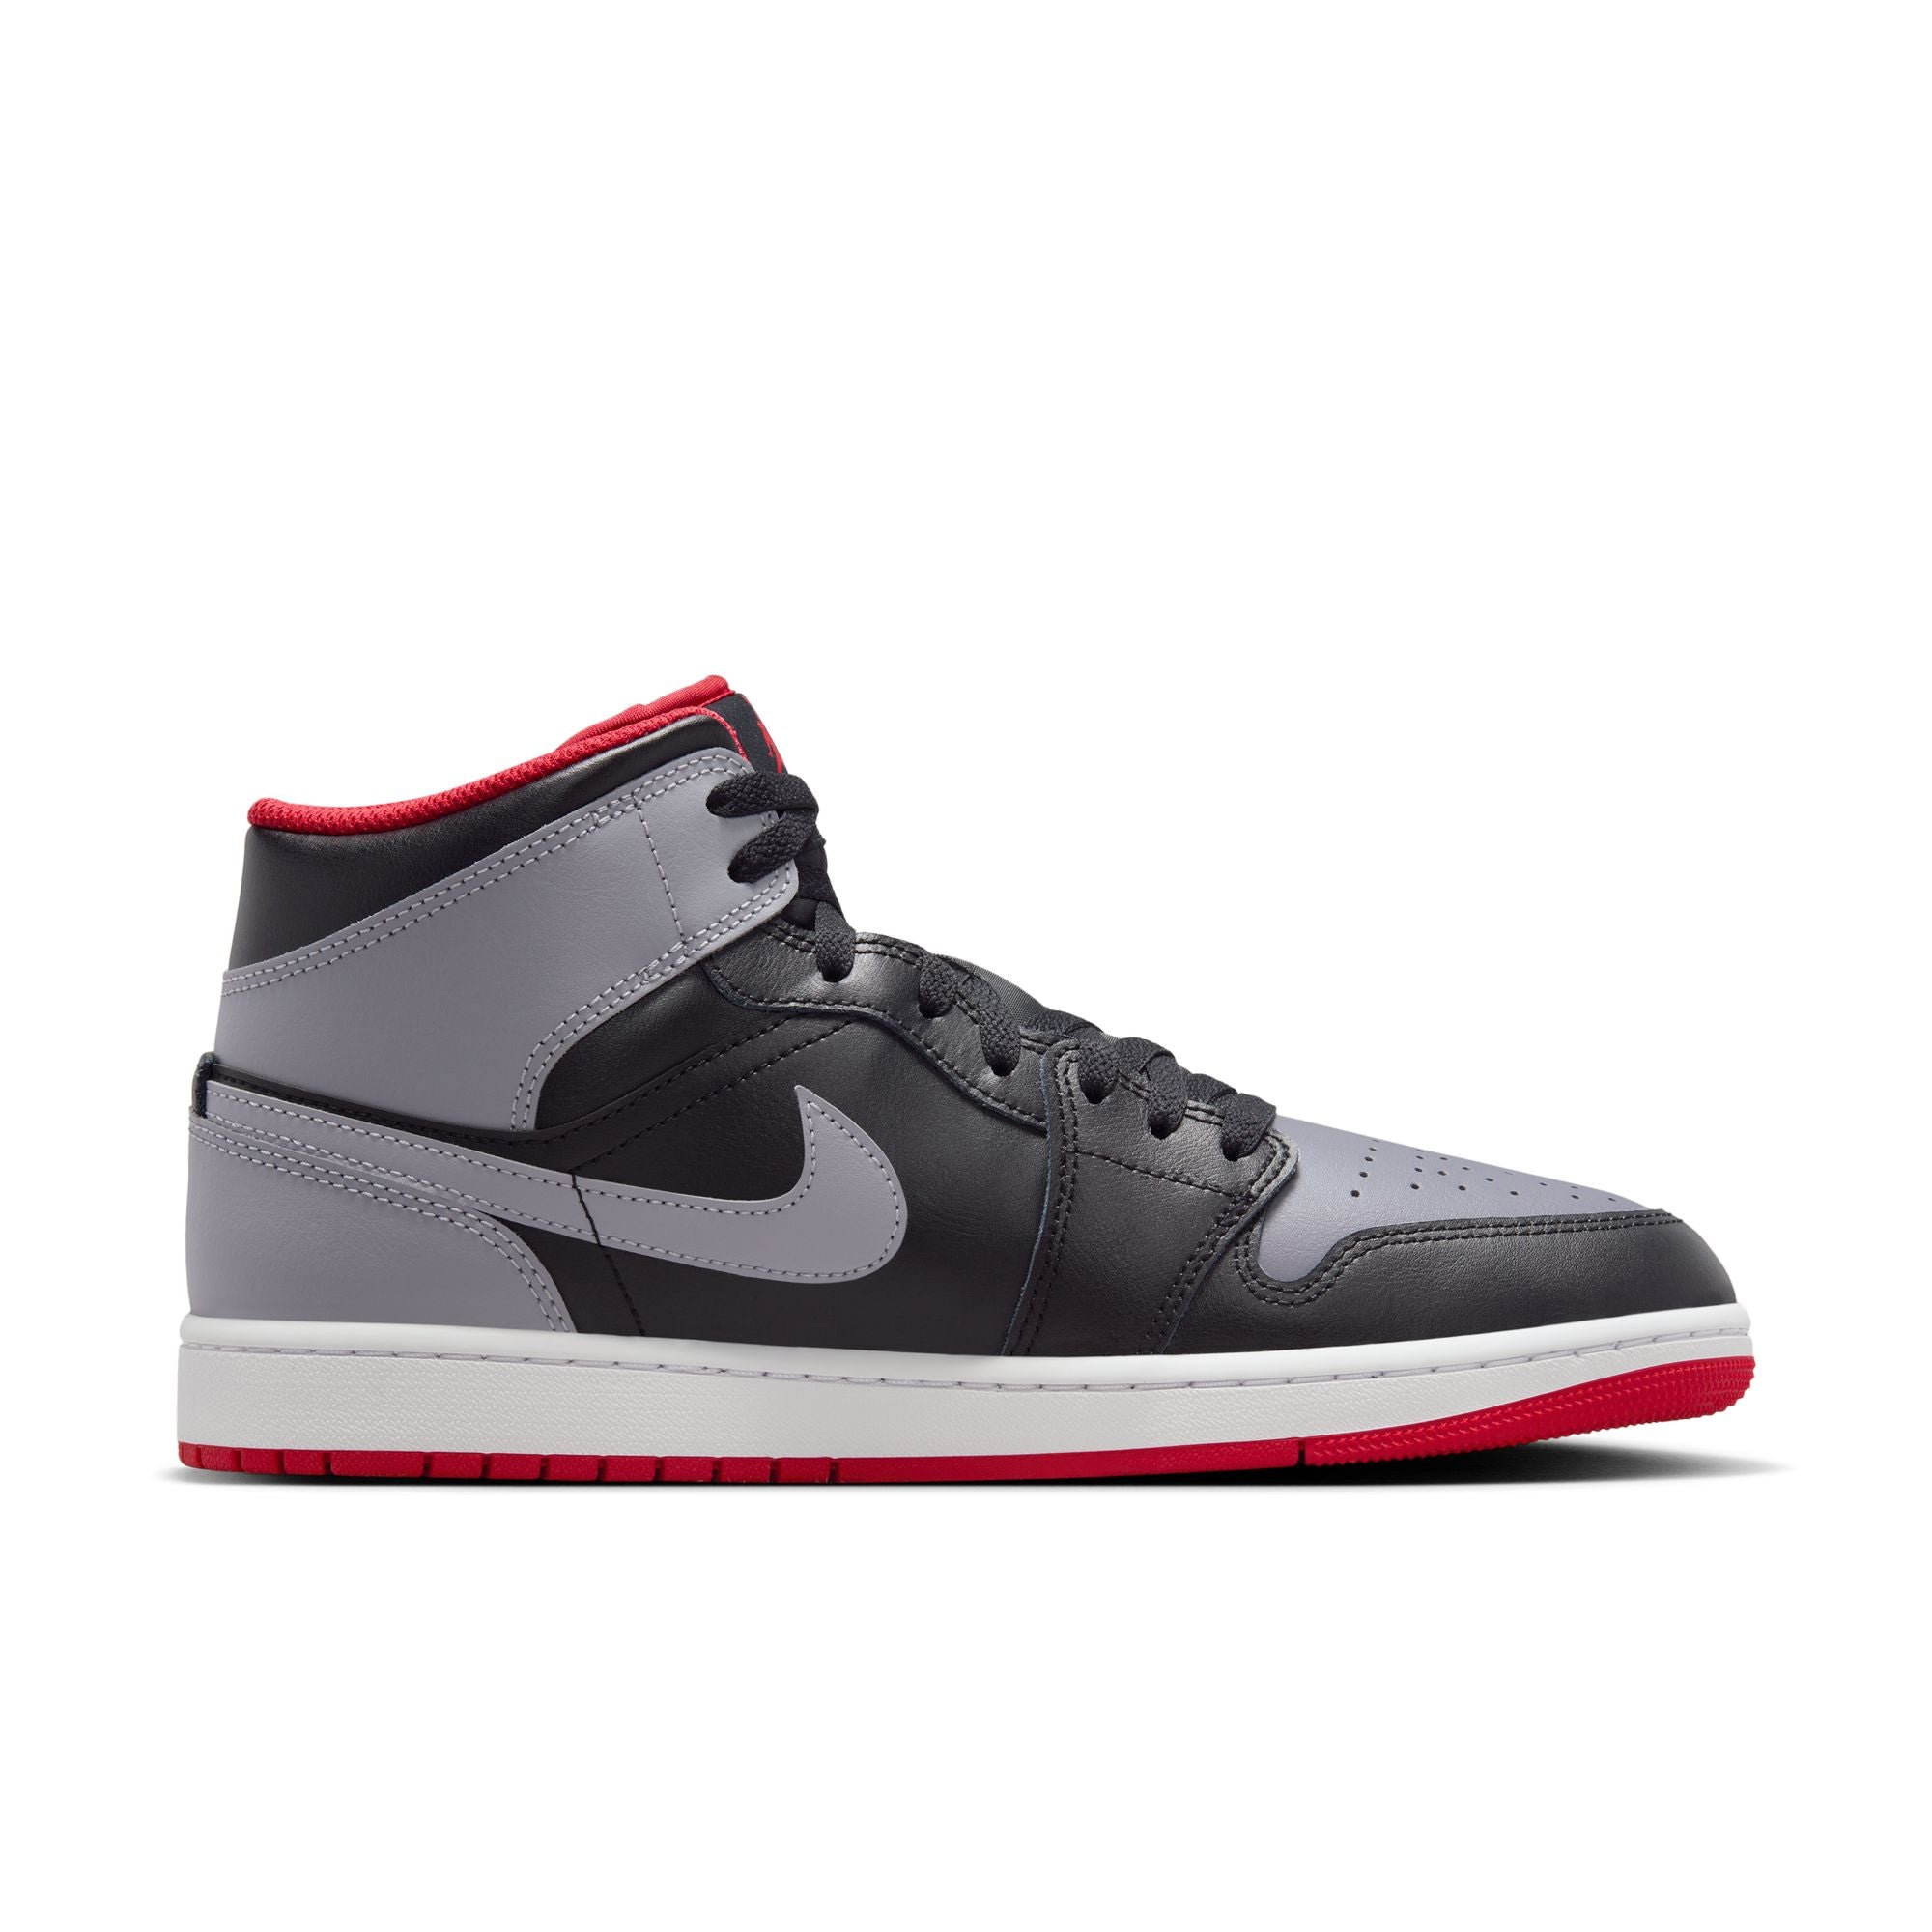 NIKE - Air Jordan 1 Mid - (Black/Cement Grey-Fire Red-Whi) view 2